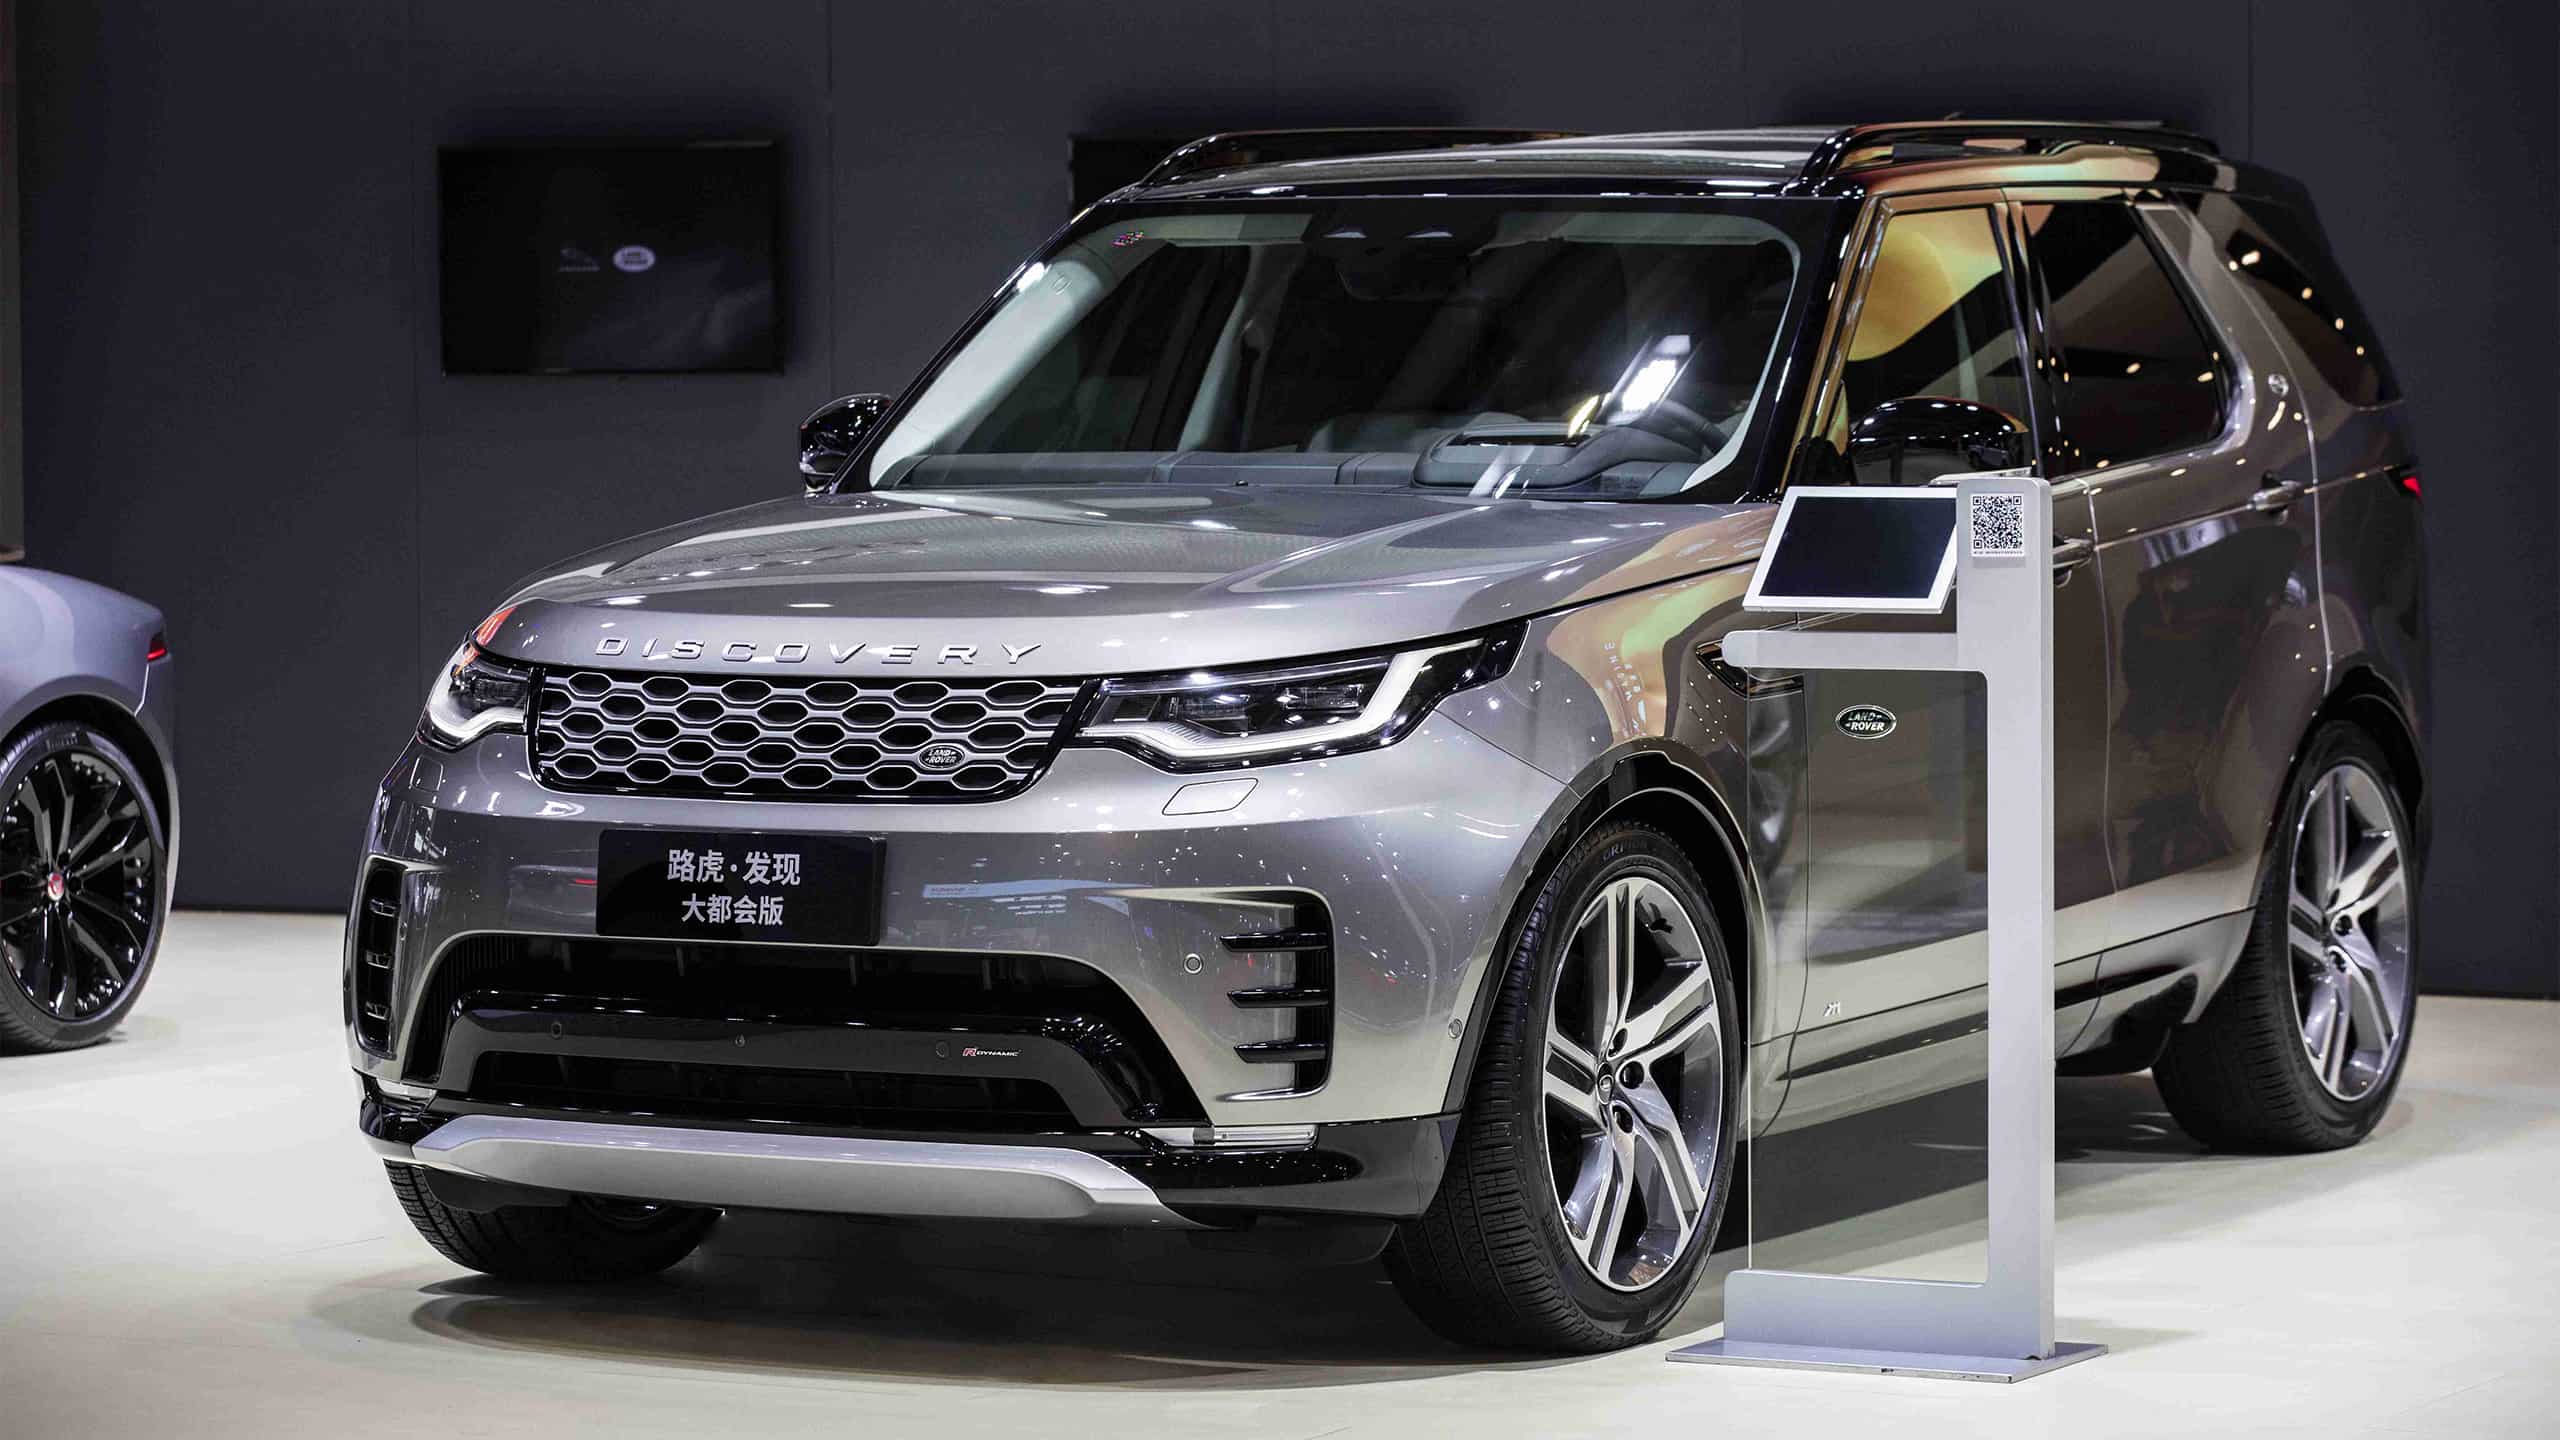 Discovery Metropolis Edition in the Auto Expo